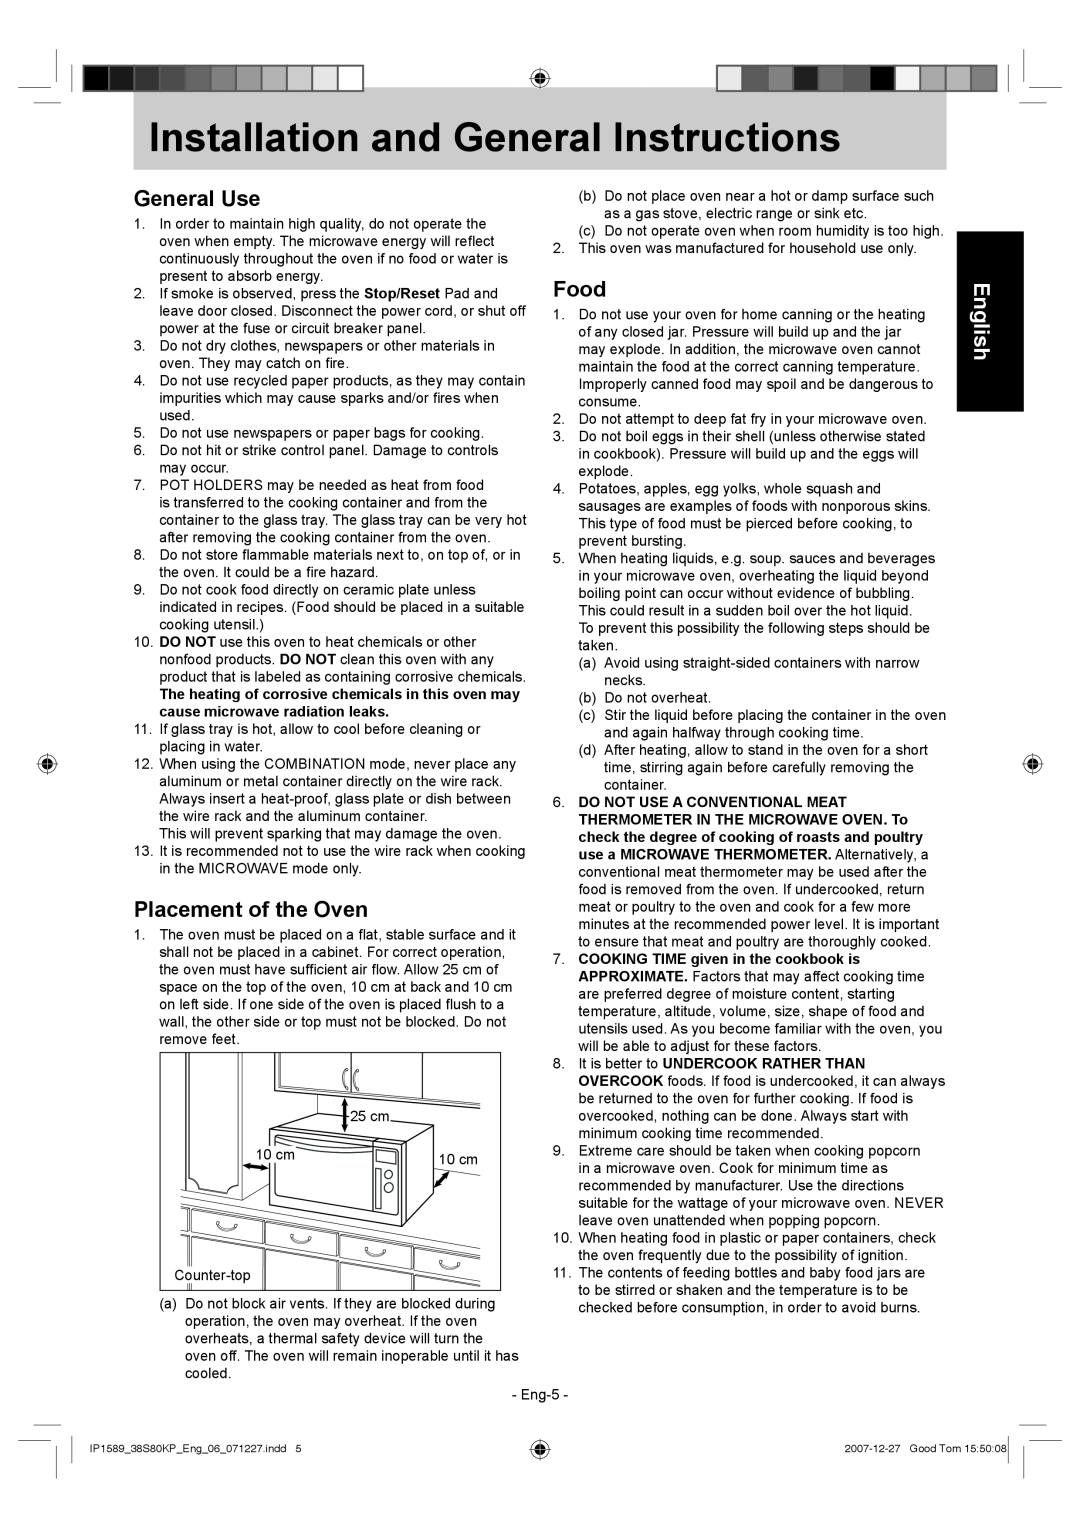 Panasonic NN-GS597M Installation and General Instructions, General Use, Placement of the Oven, Food, English 